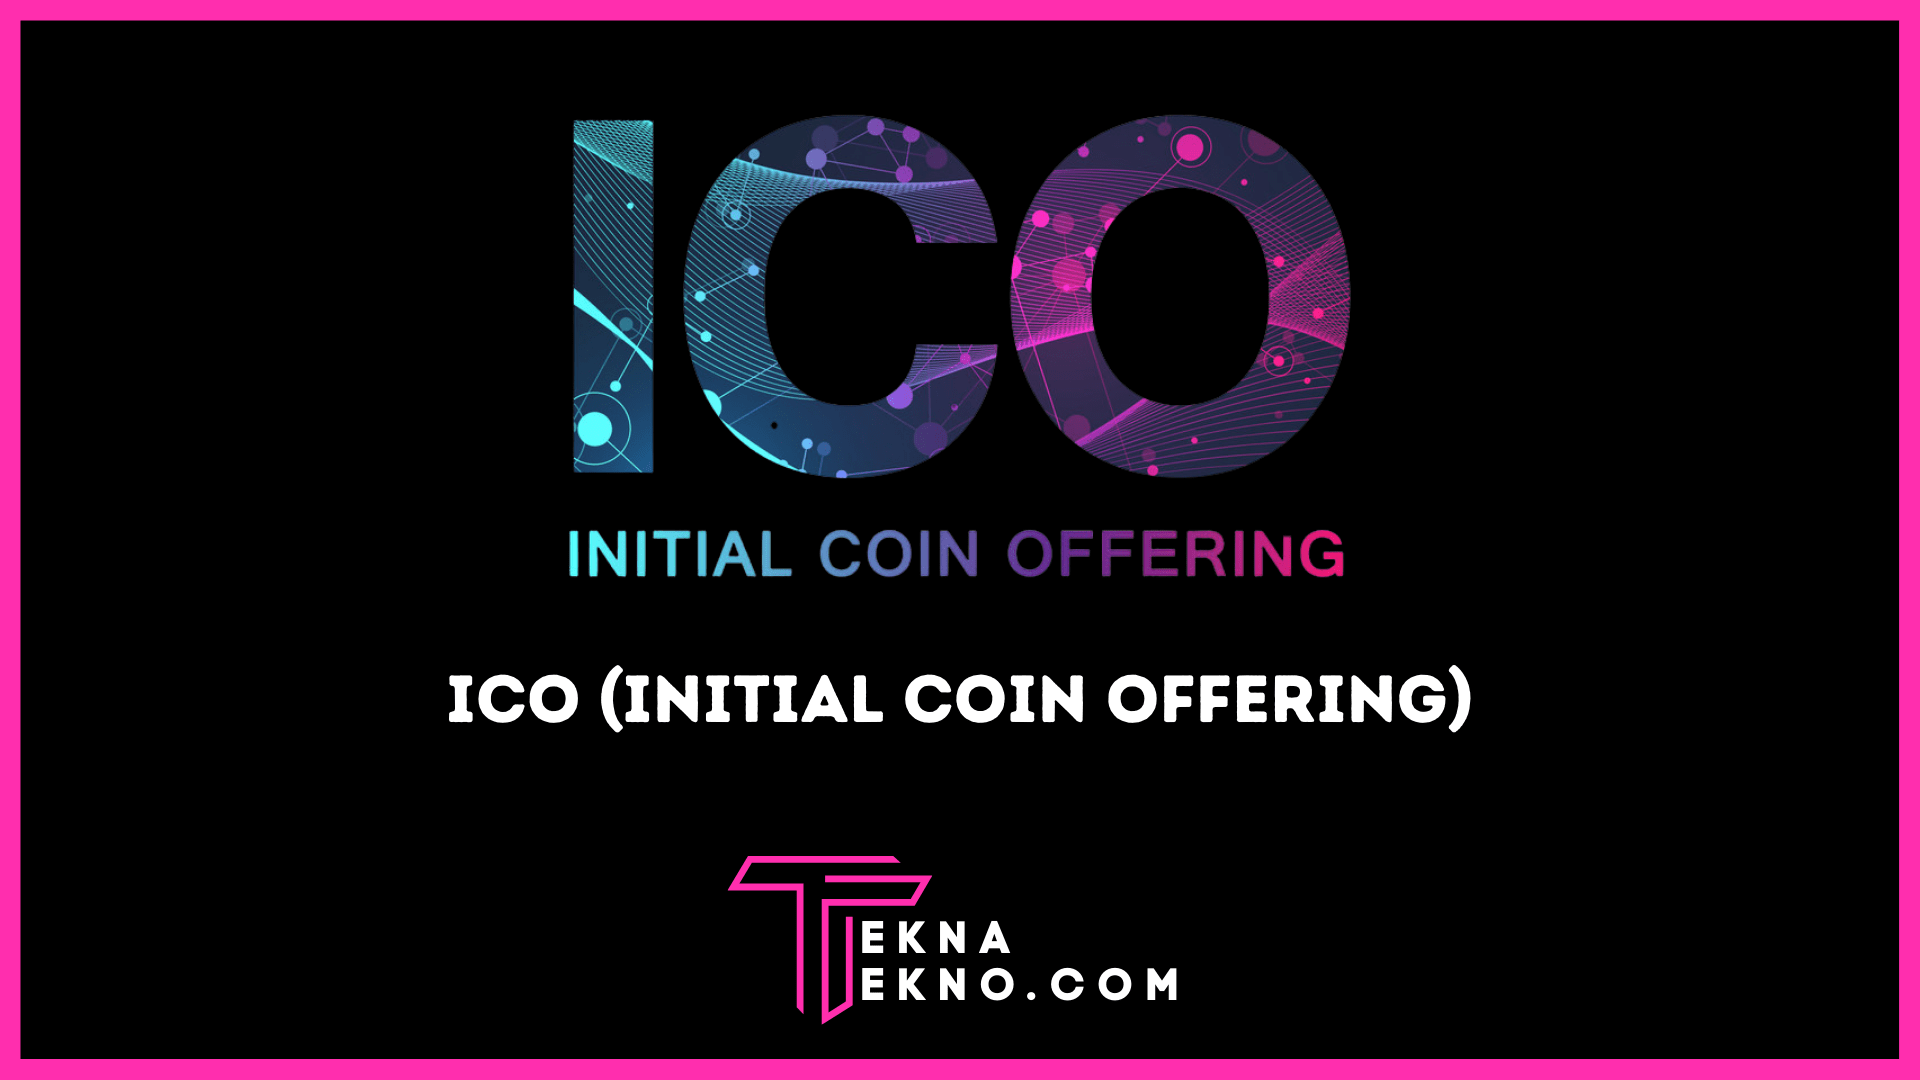 ICO (Initial Coin Offering), Cara Terhindar Scam Saat Trading Crypto